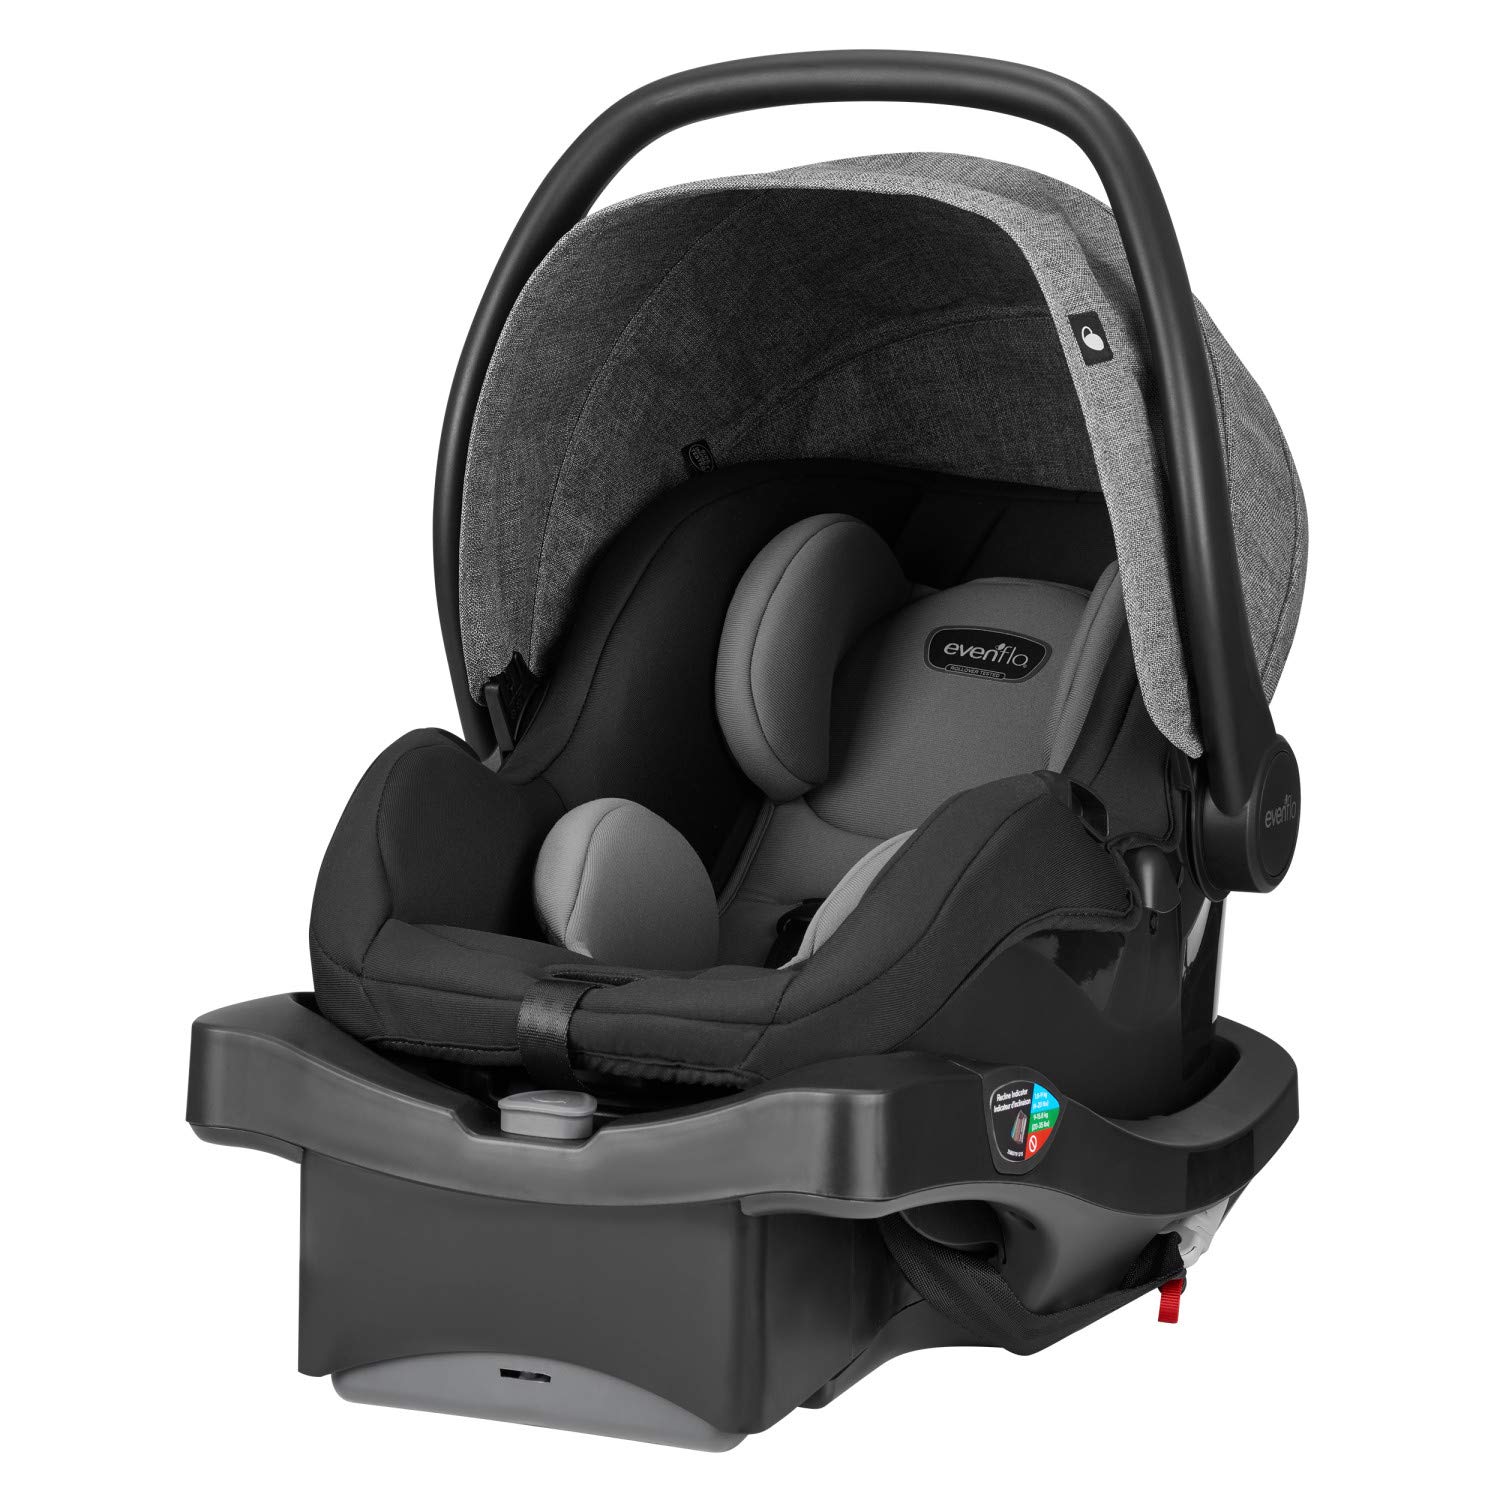 2022 Evenflo LiteMax DLX Infant Carseat Review – Premium Safety ...